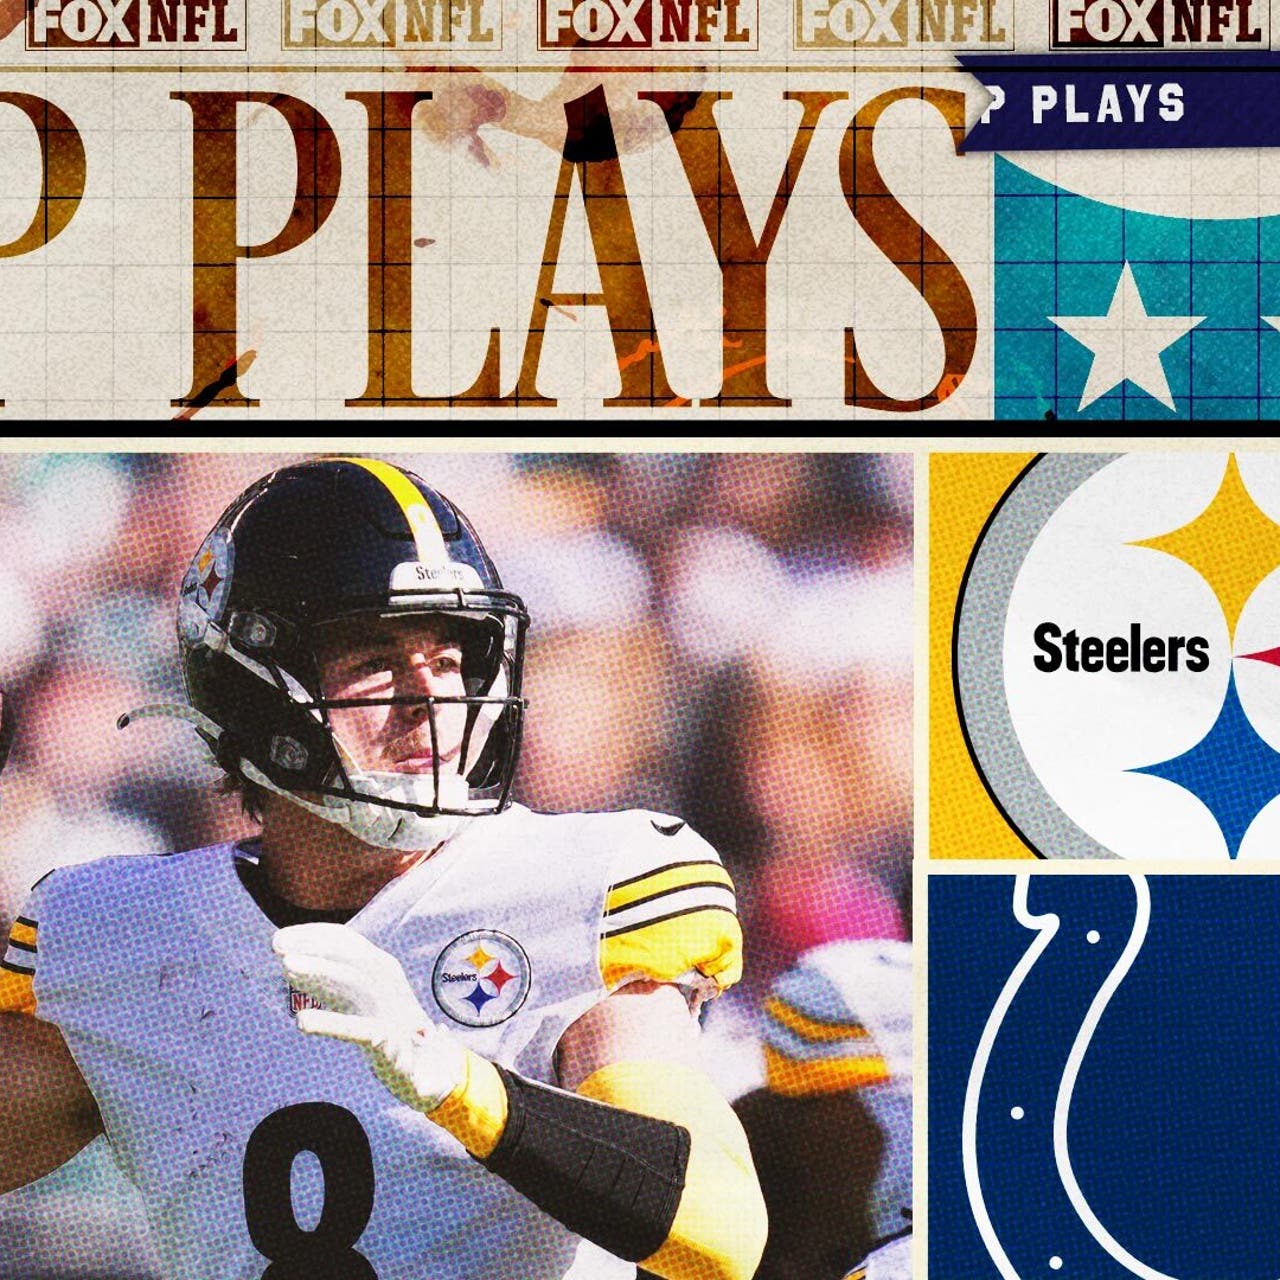 NFL Week 12 top plays: Steelers top Colts on Monday Night Football